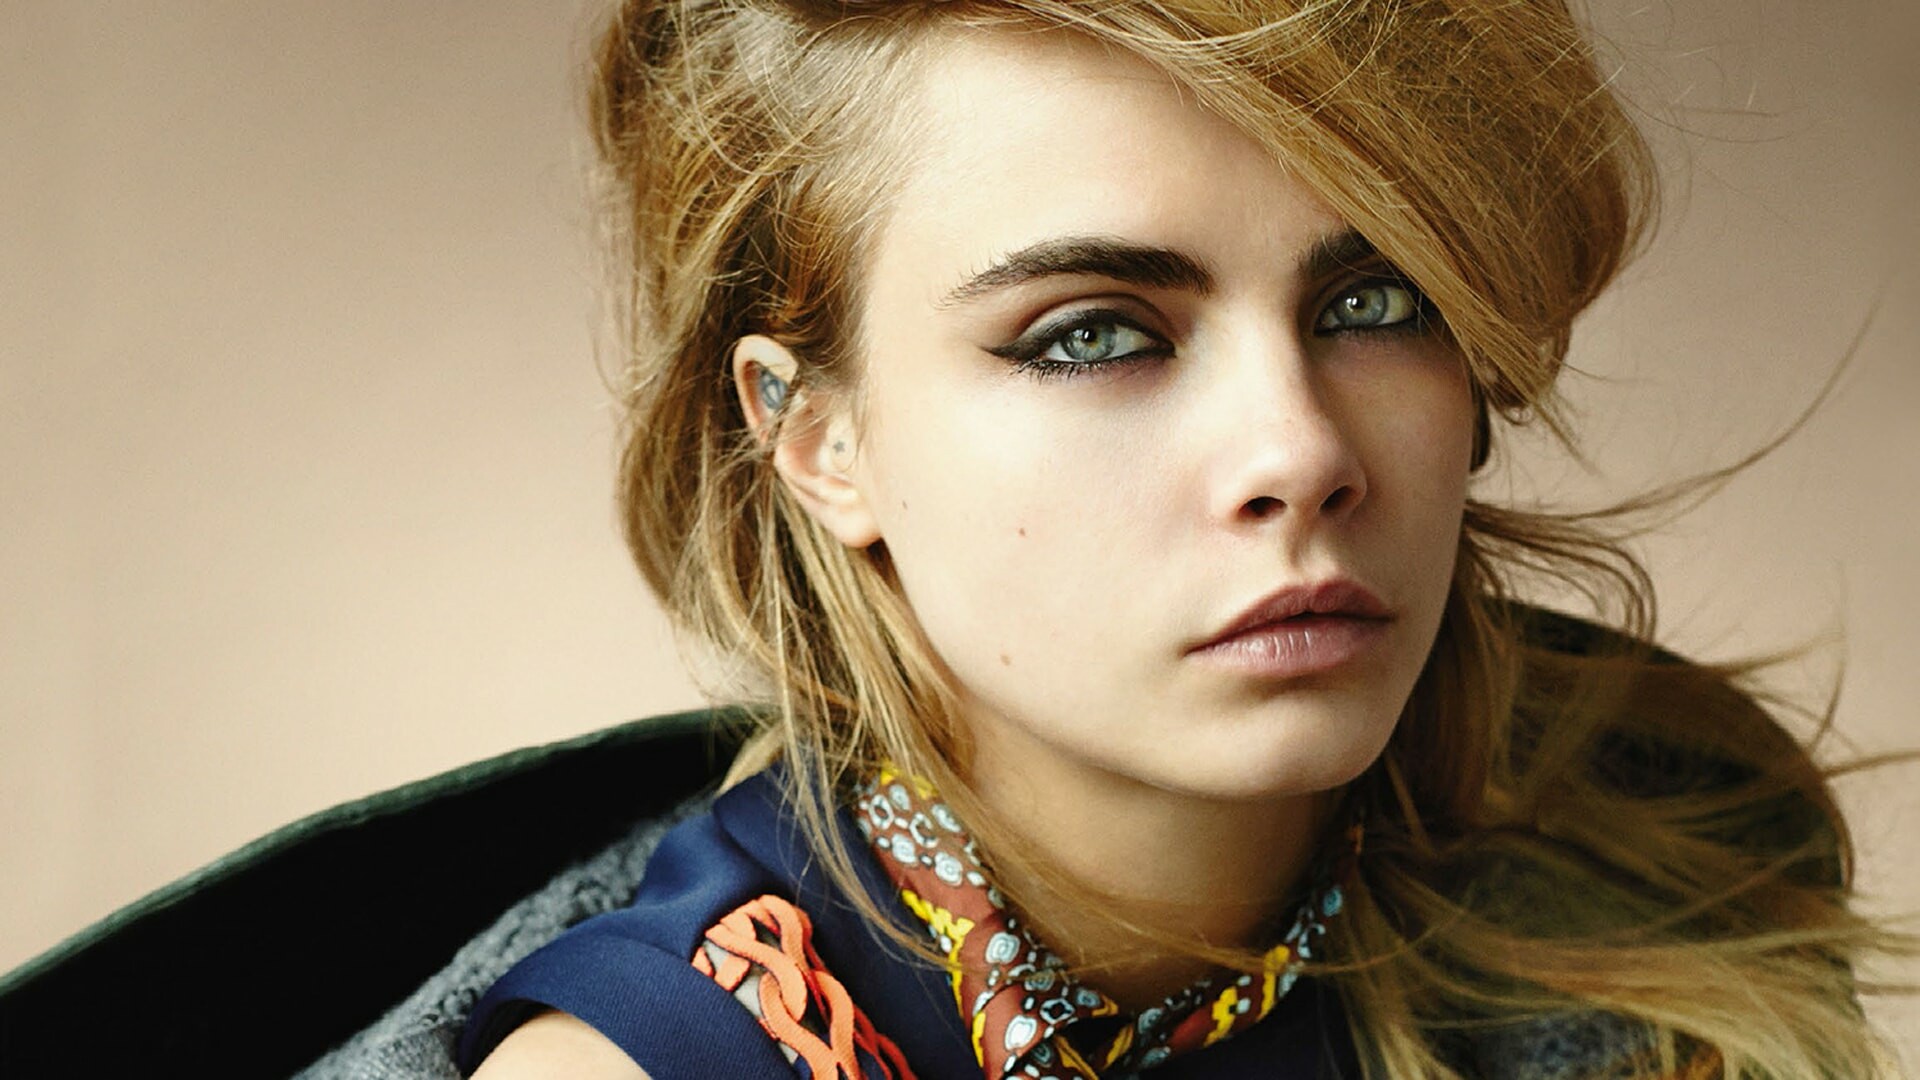 Cara Delevingne: The multi-talented actress, model, singer, writer, and activist. 1920x1080 Full HD Wallpaper.